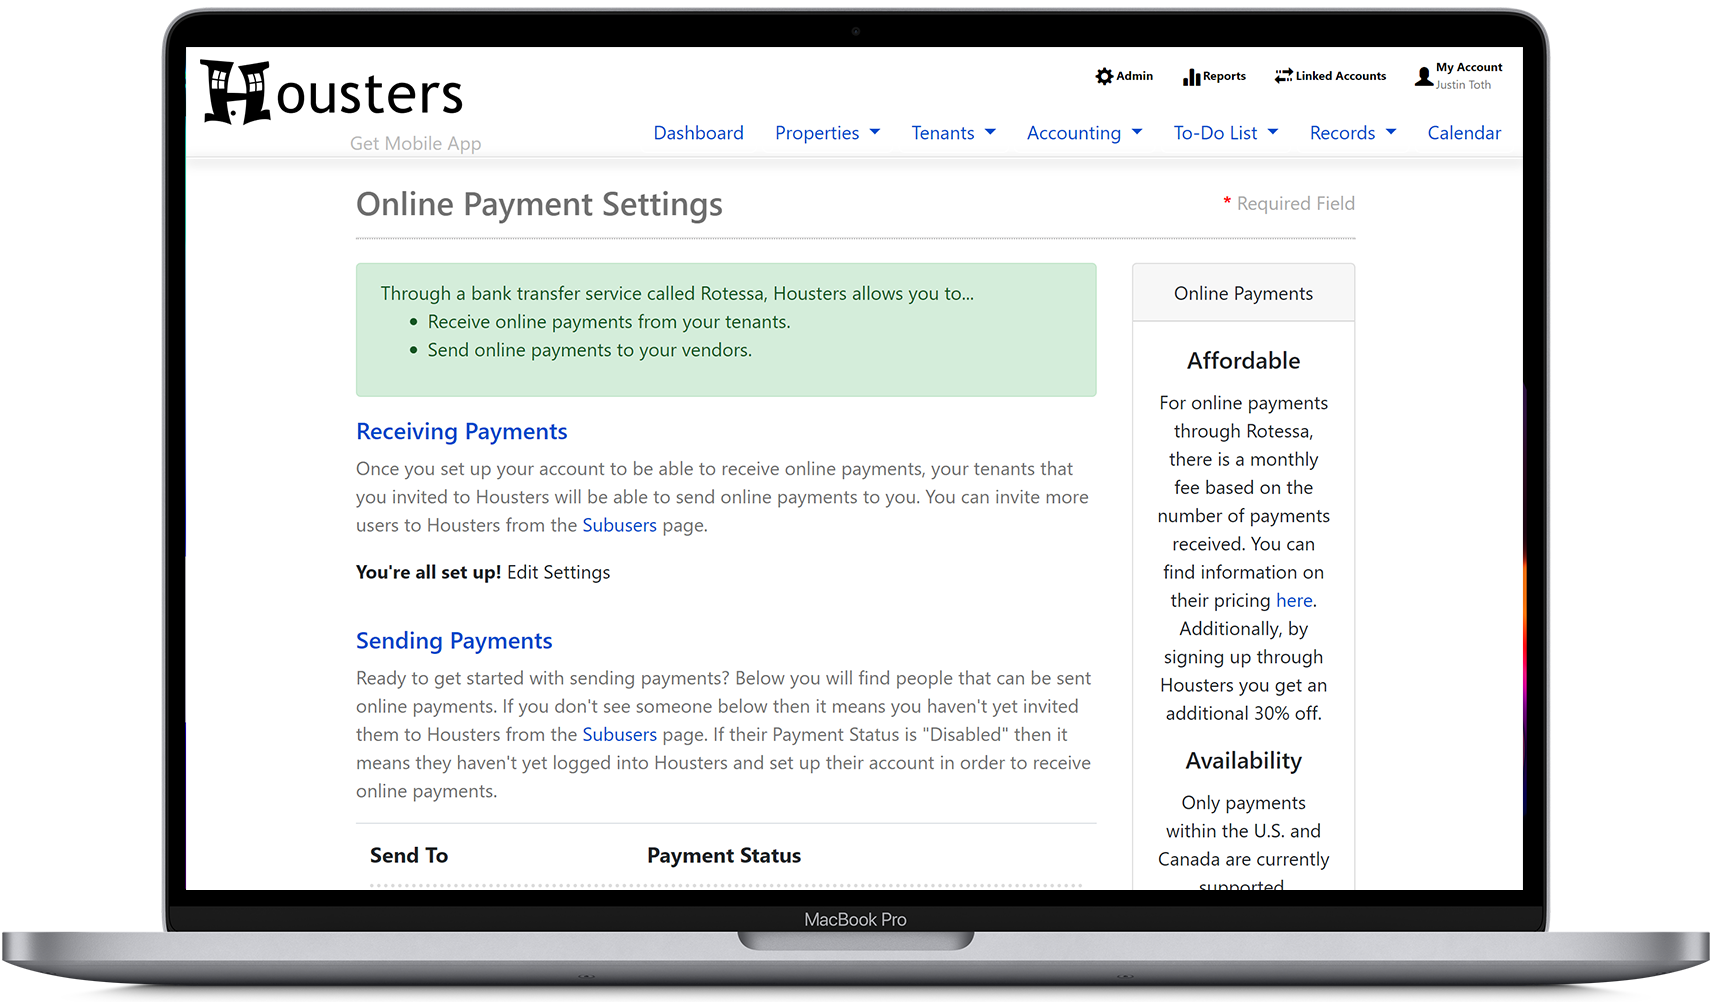 Add a bank account where online payments will be sent to